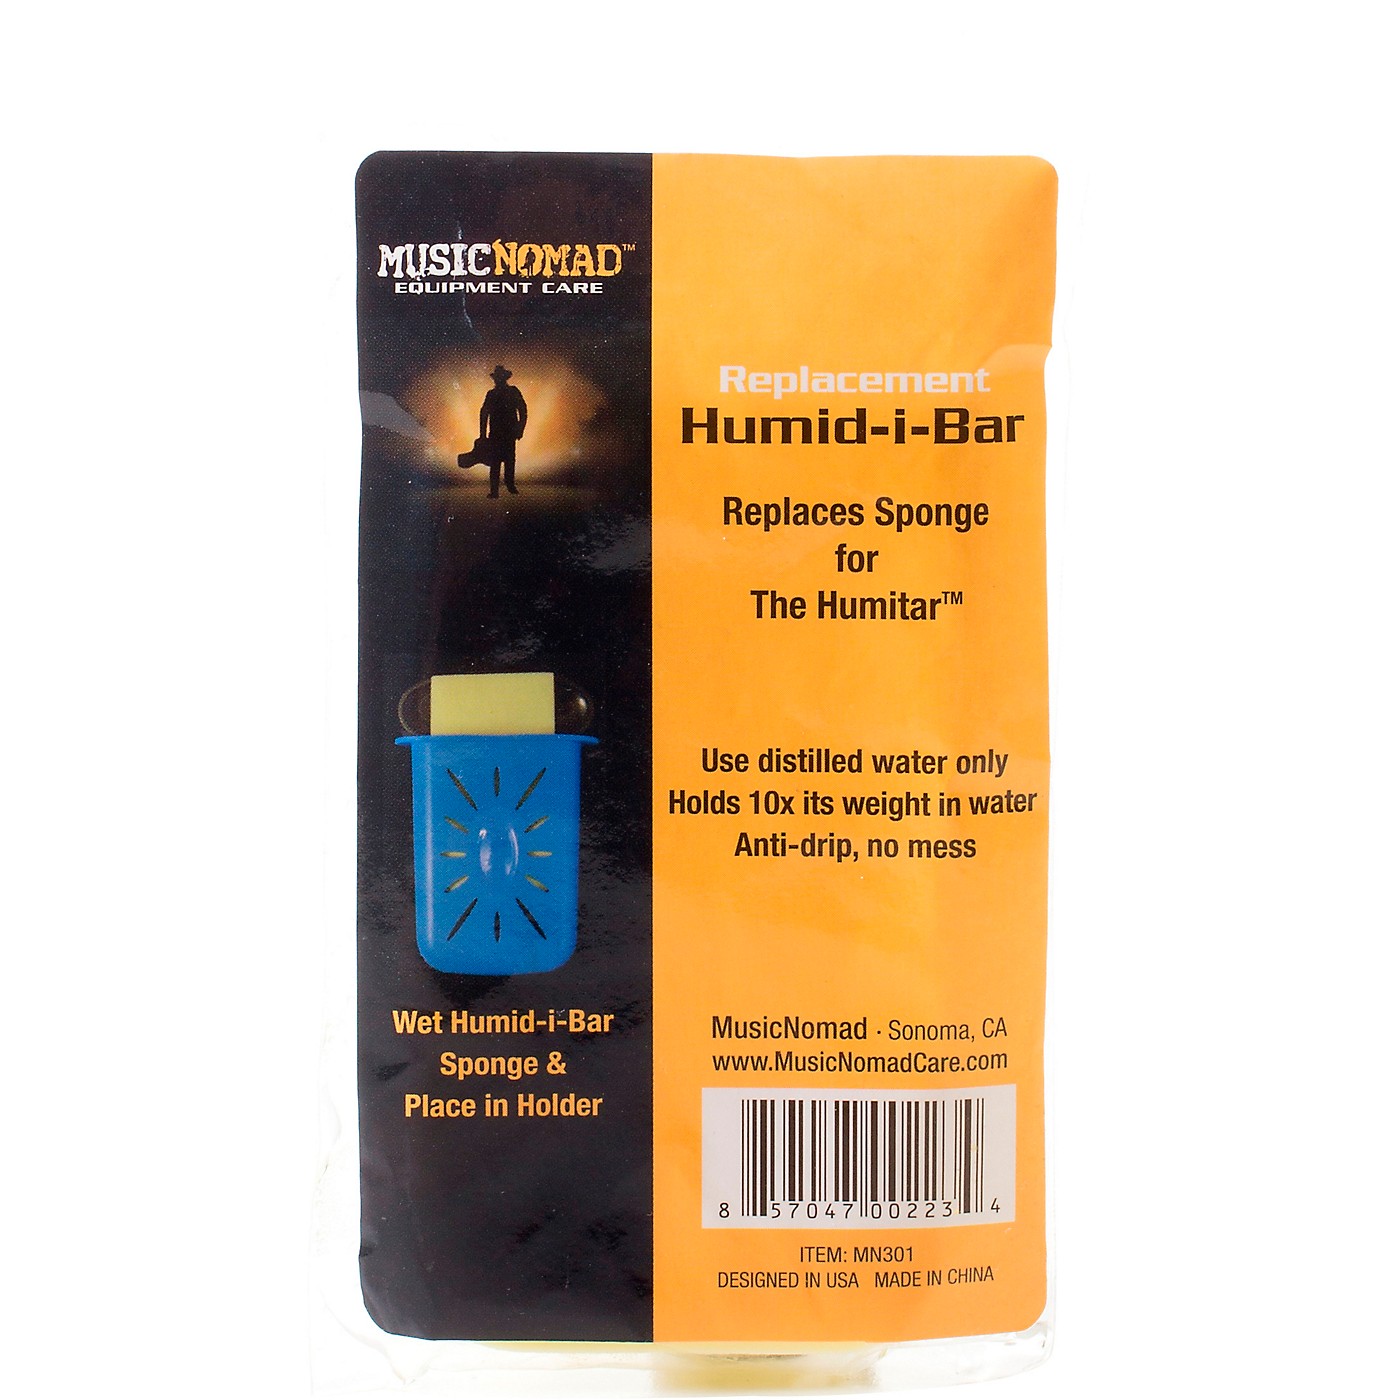 Music Nomad Humid-i-Bar Replacement Sponge for the Humitar Humidifier thumbnail